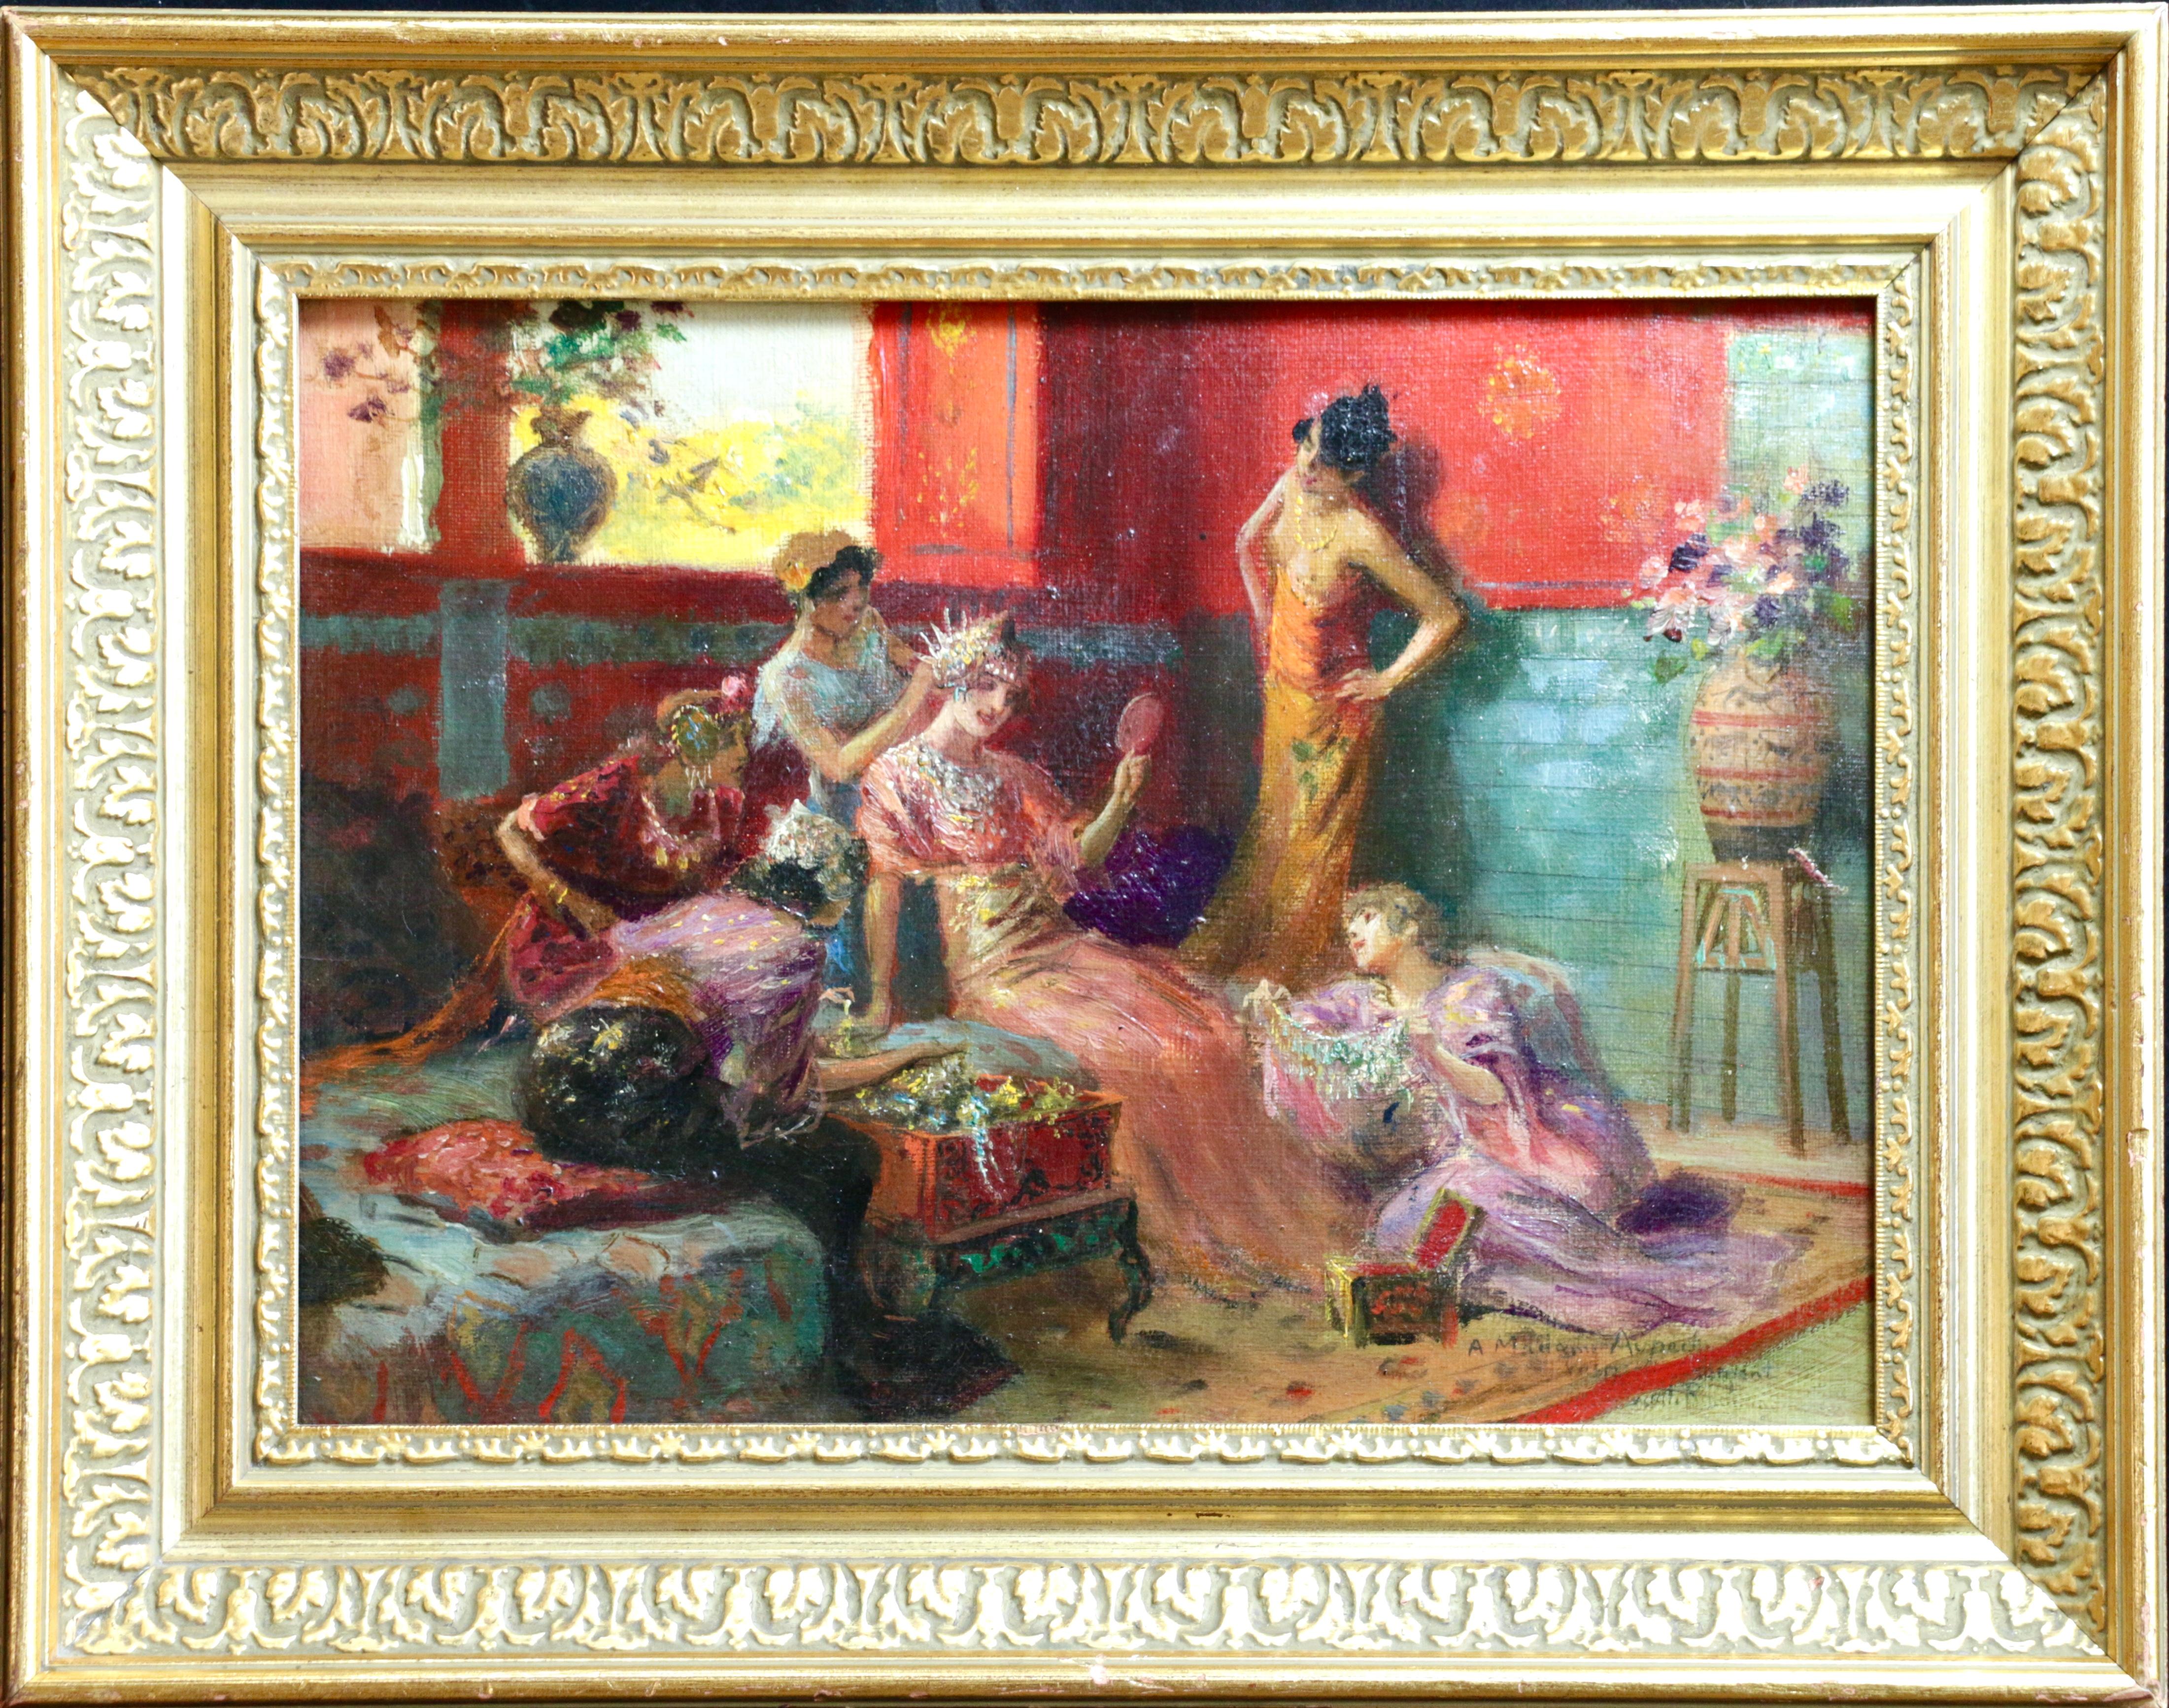 The Harem - 19th Century Oil, Orientalist Figures in Interior by Rochegrosse - Painting by Georges Antoine Rochegrosse